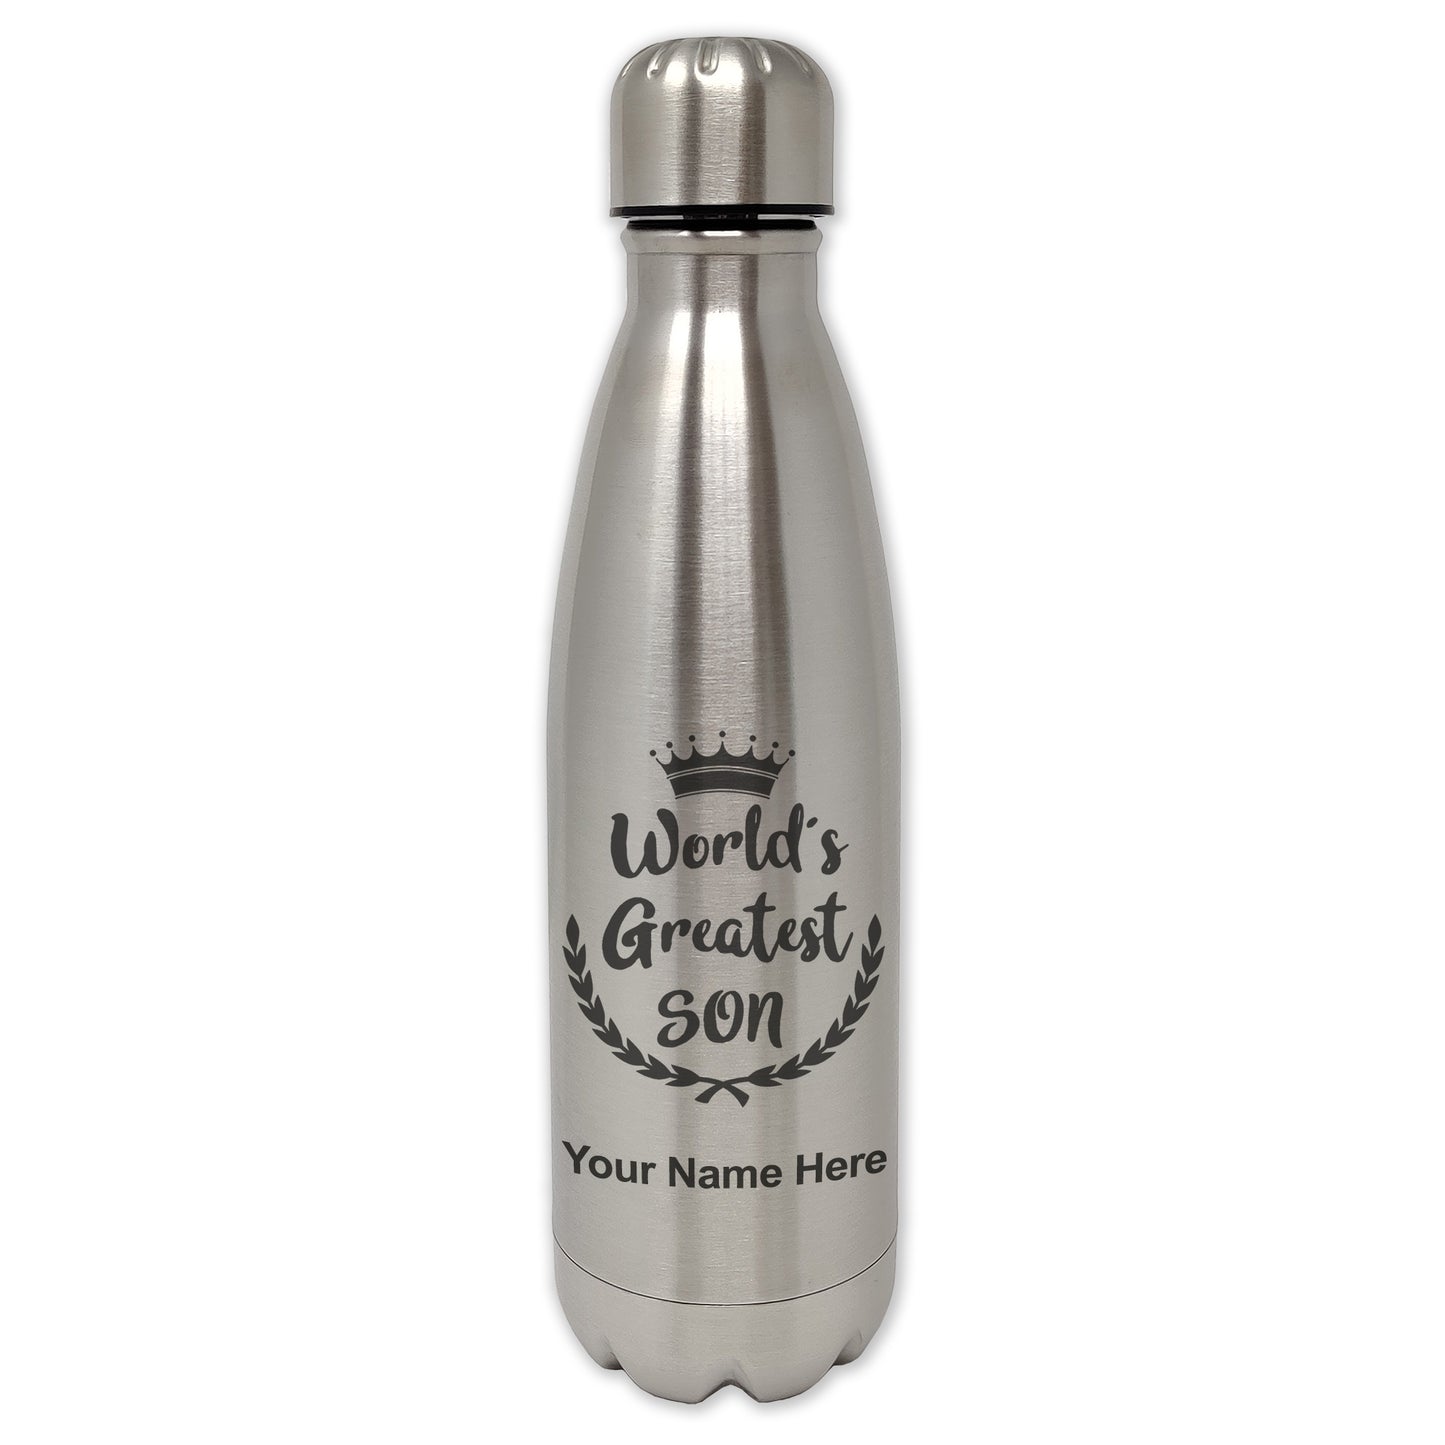 LaserGram Single Wall Water Bottle, World's Greatest Son, Personalized Engraving Included